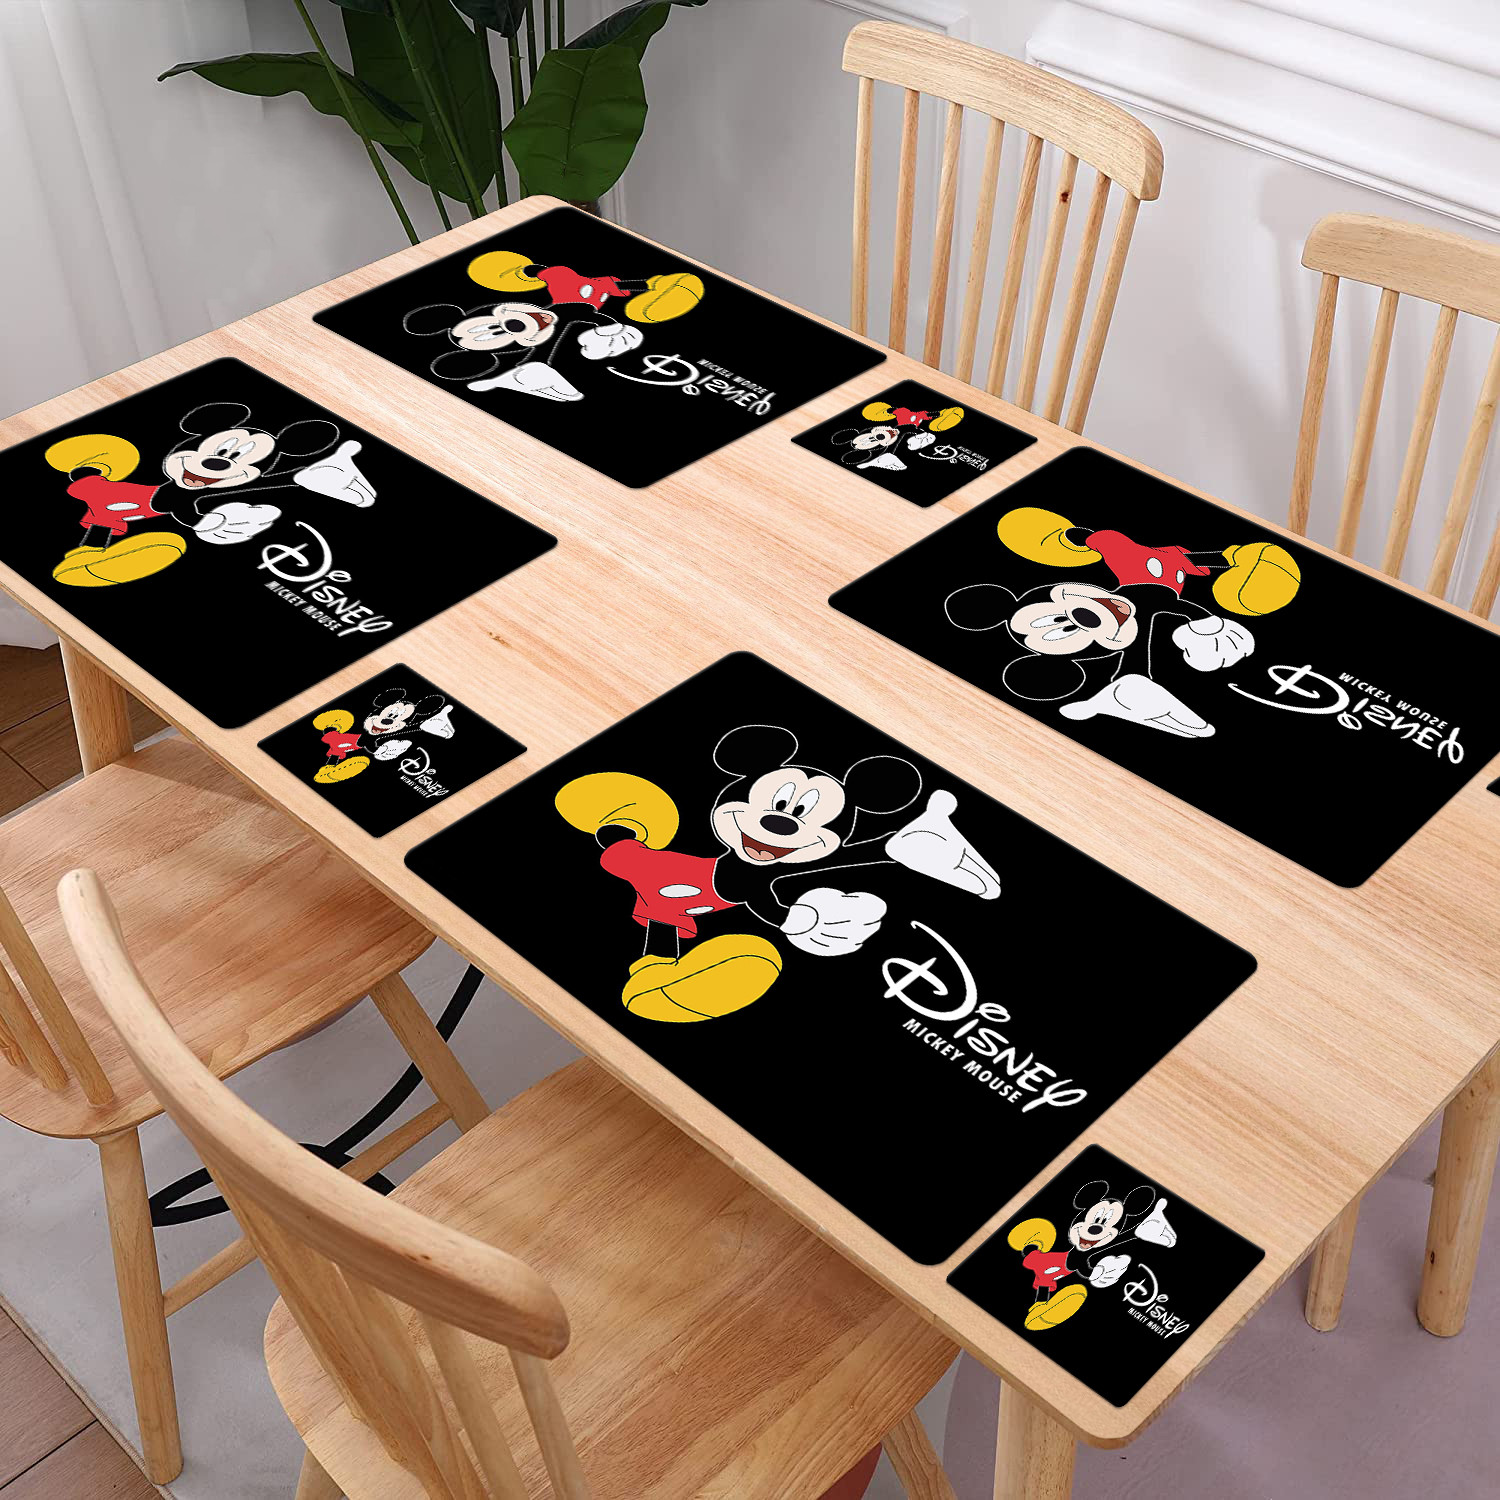 Kuber Industries Multiuses Mickey Mouse Print PVC Table Placemat With 6 Coasters for kitchen, Dining Table Set of 6 (Black)